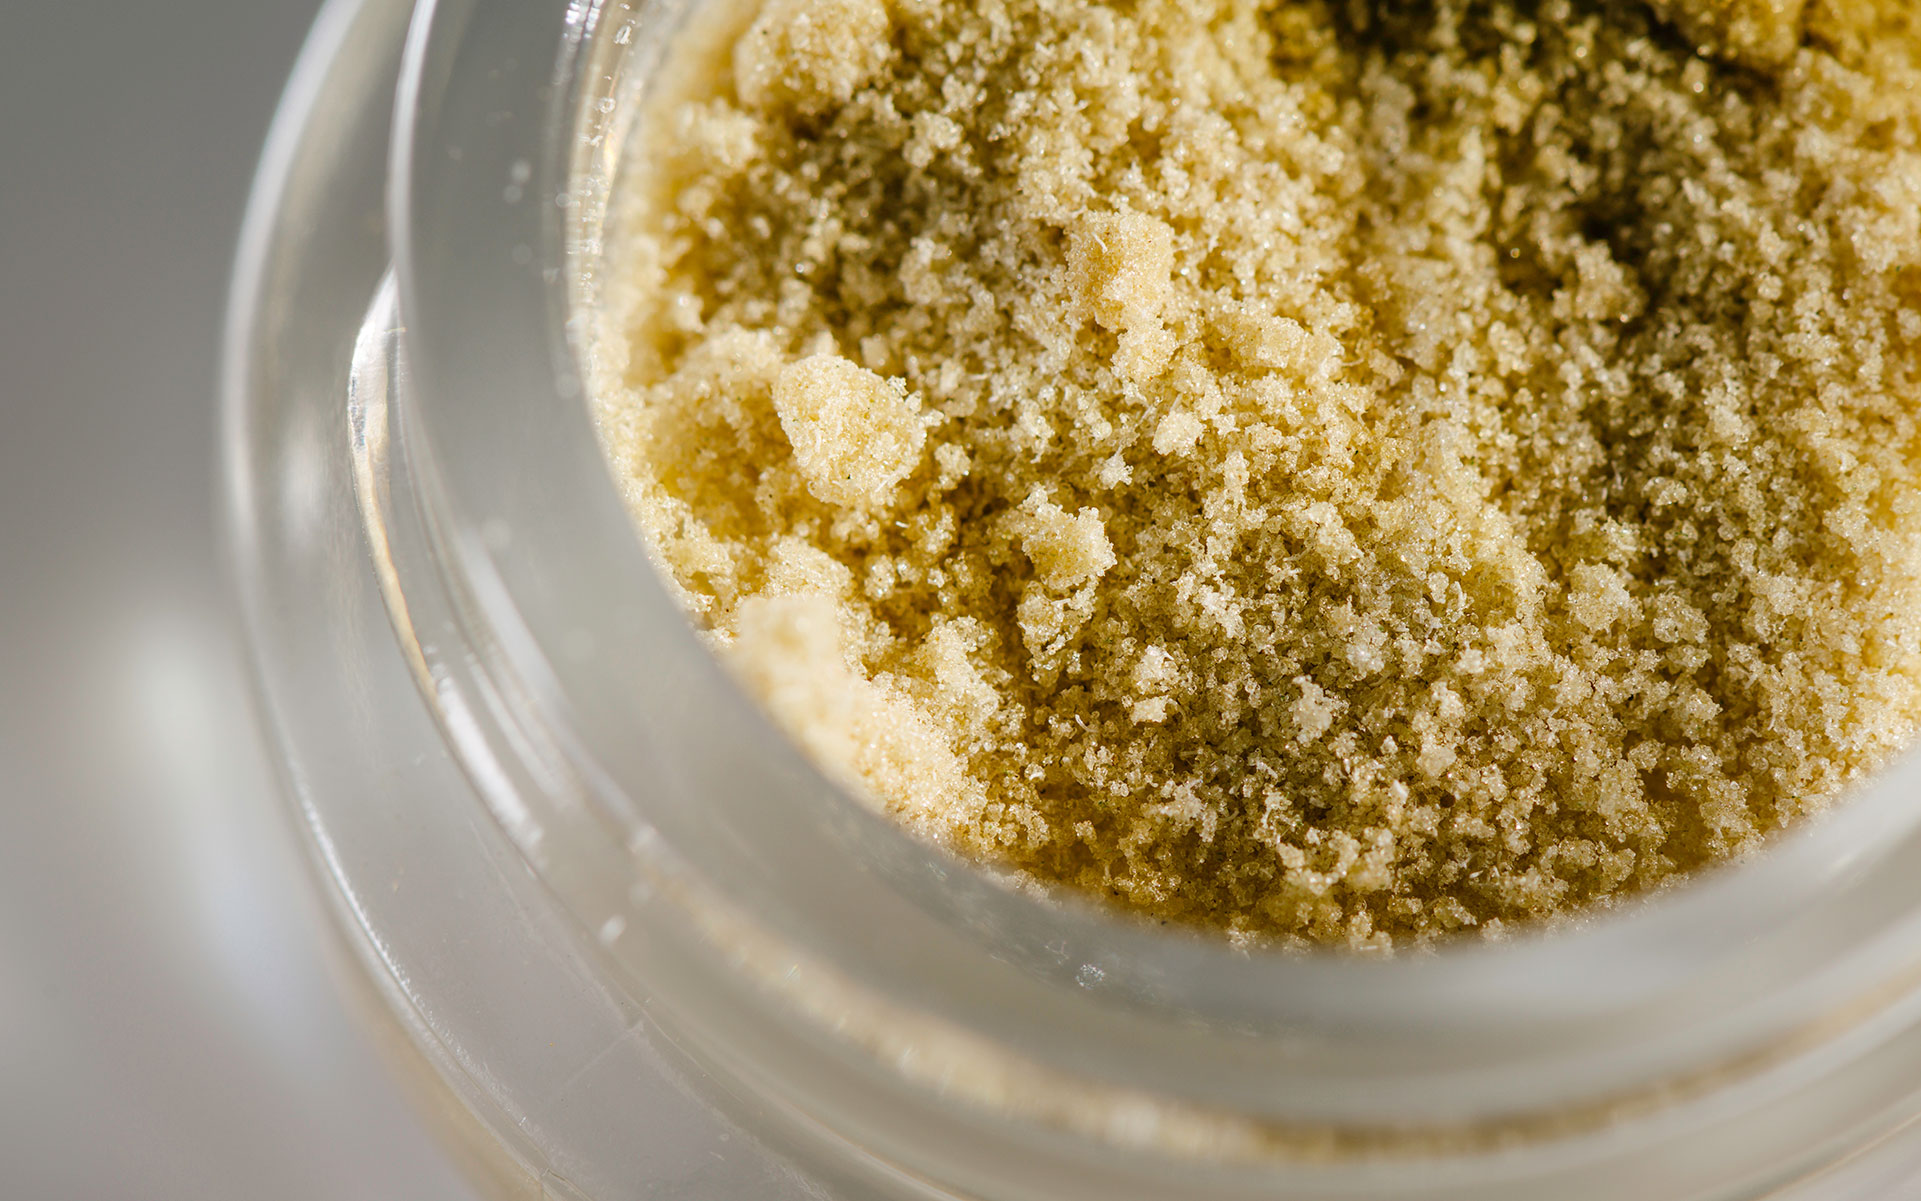 ice water hash, cannabis concentrate, marijuana concentrate